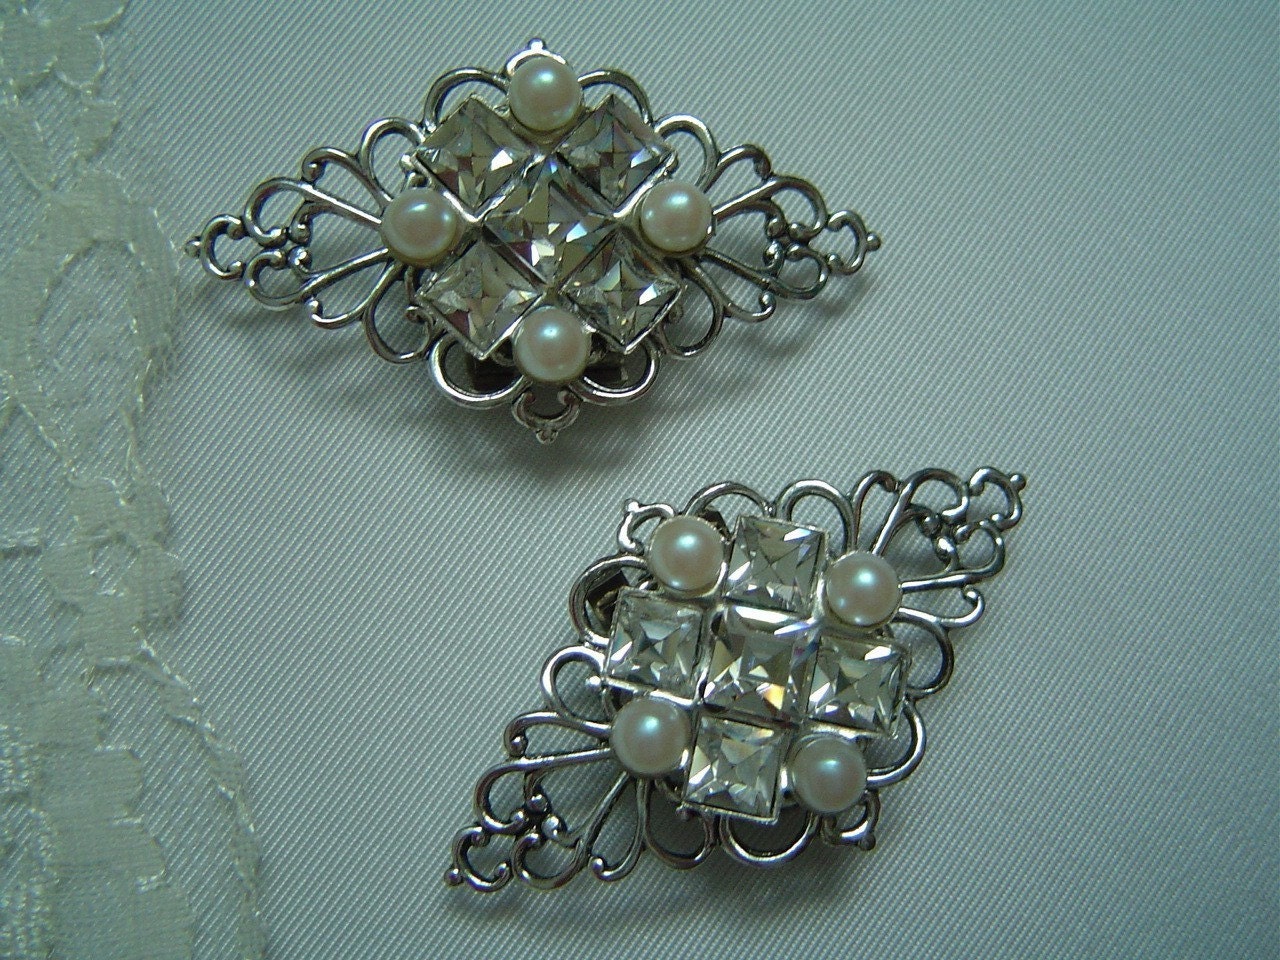 Bridal shoe clips made with Swarovski rhinestones and pearls